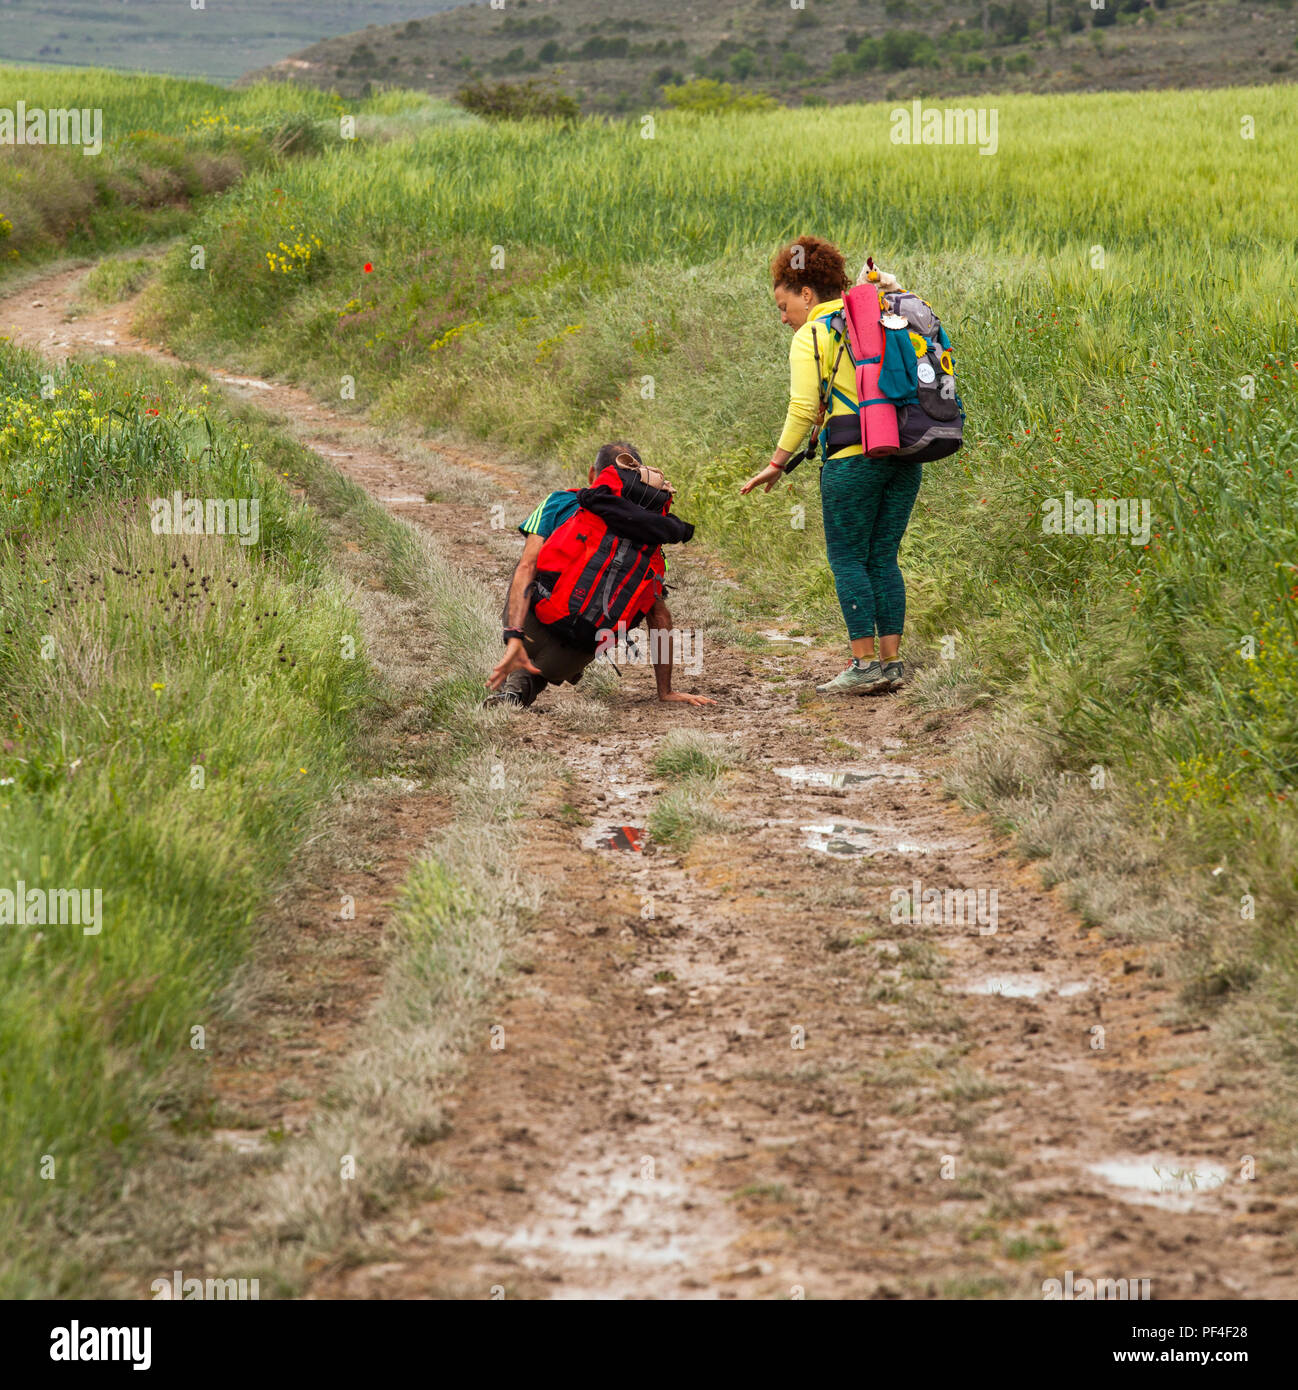 Pilgrim slipped fell over in mud while walking the Spanish Camino de Santiago the way of St James pilgrimage route Spain Stock Photo